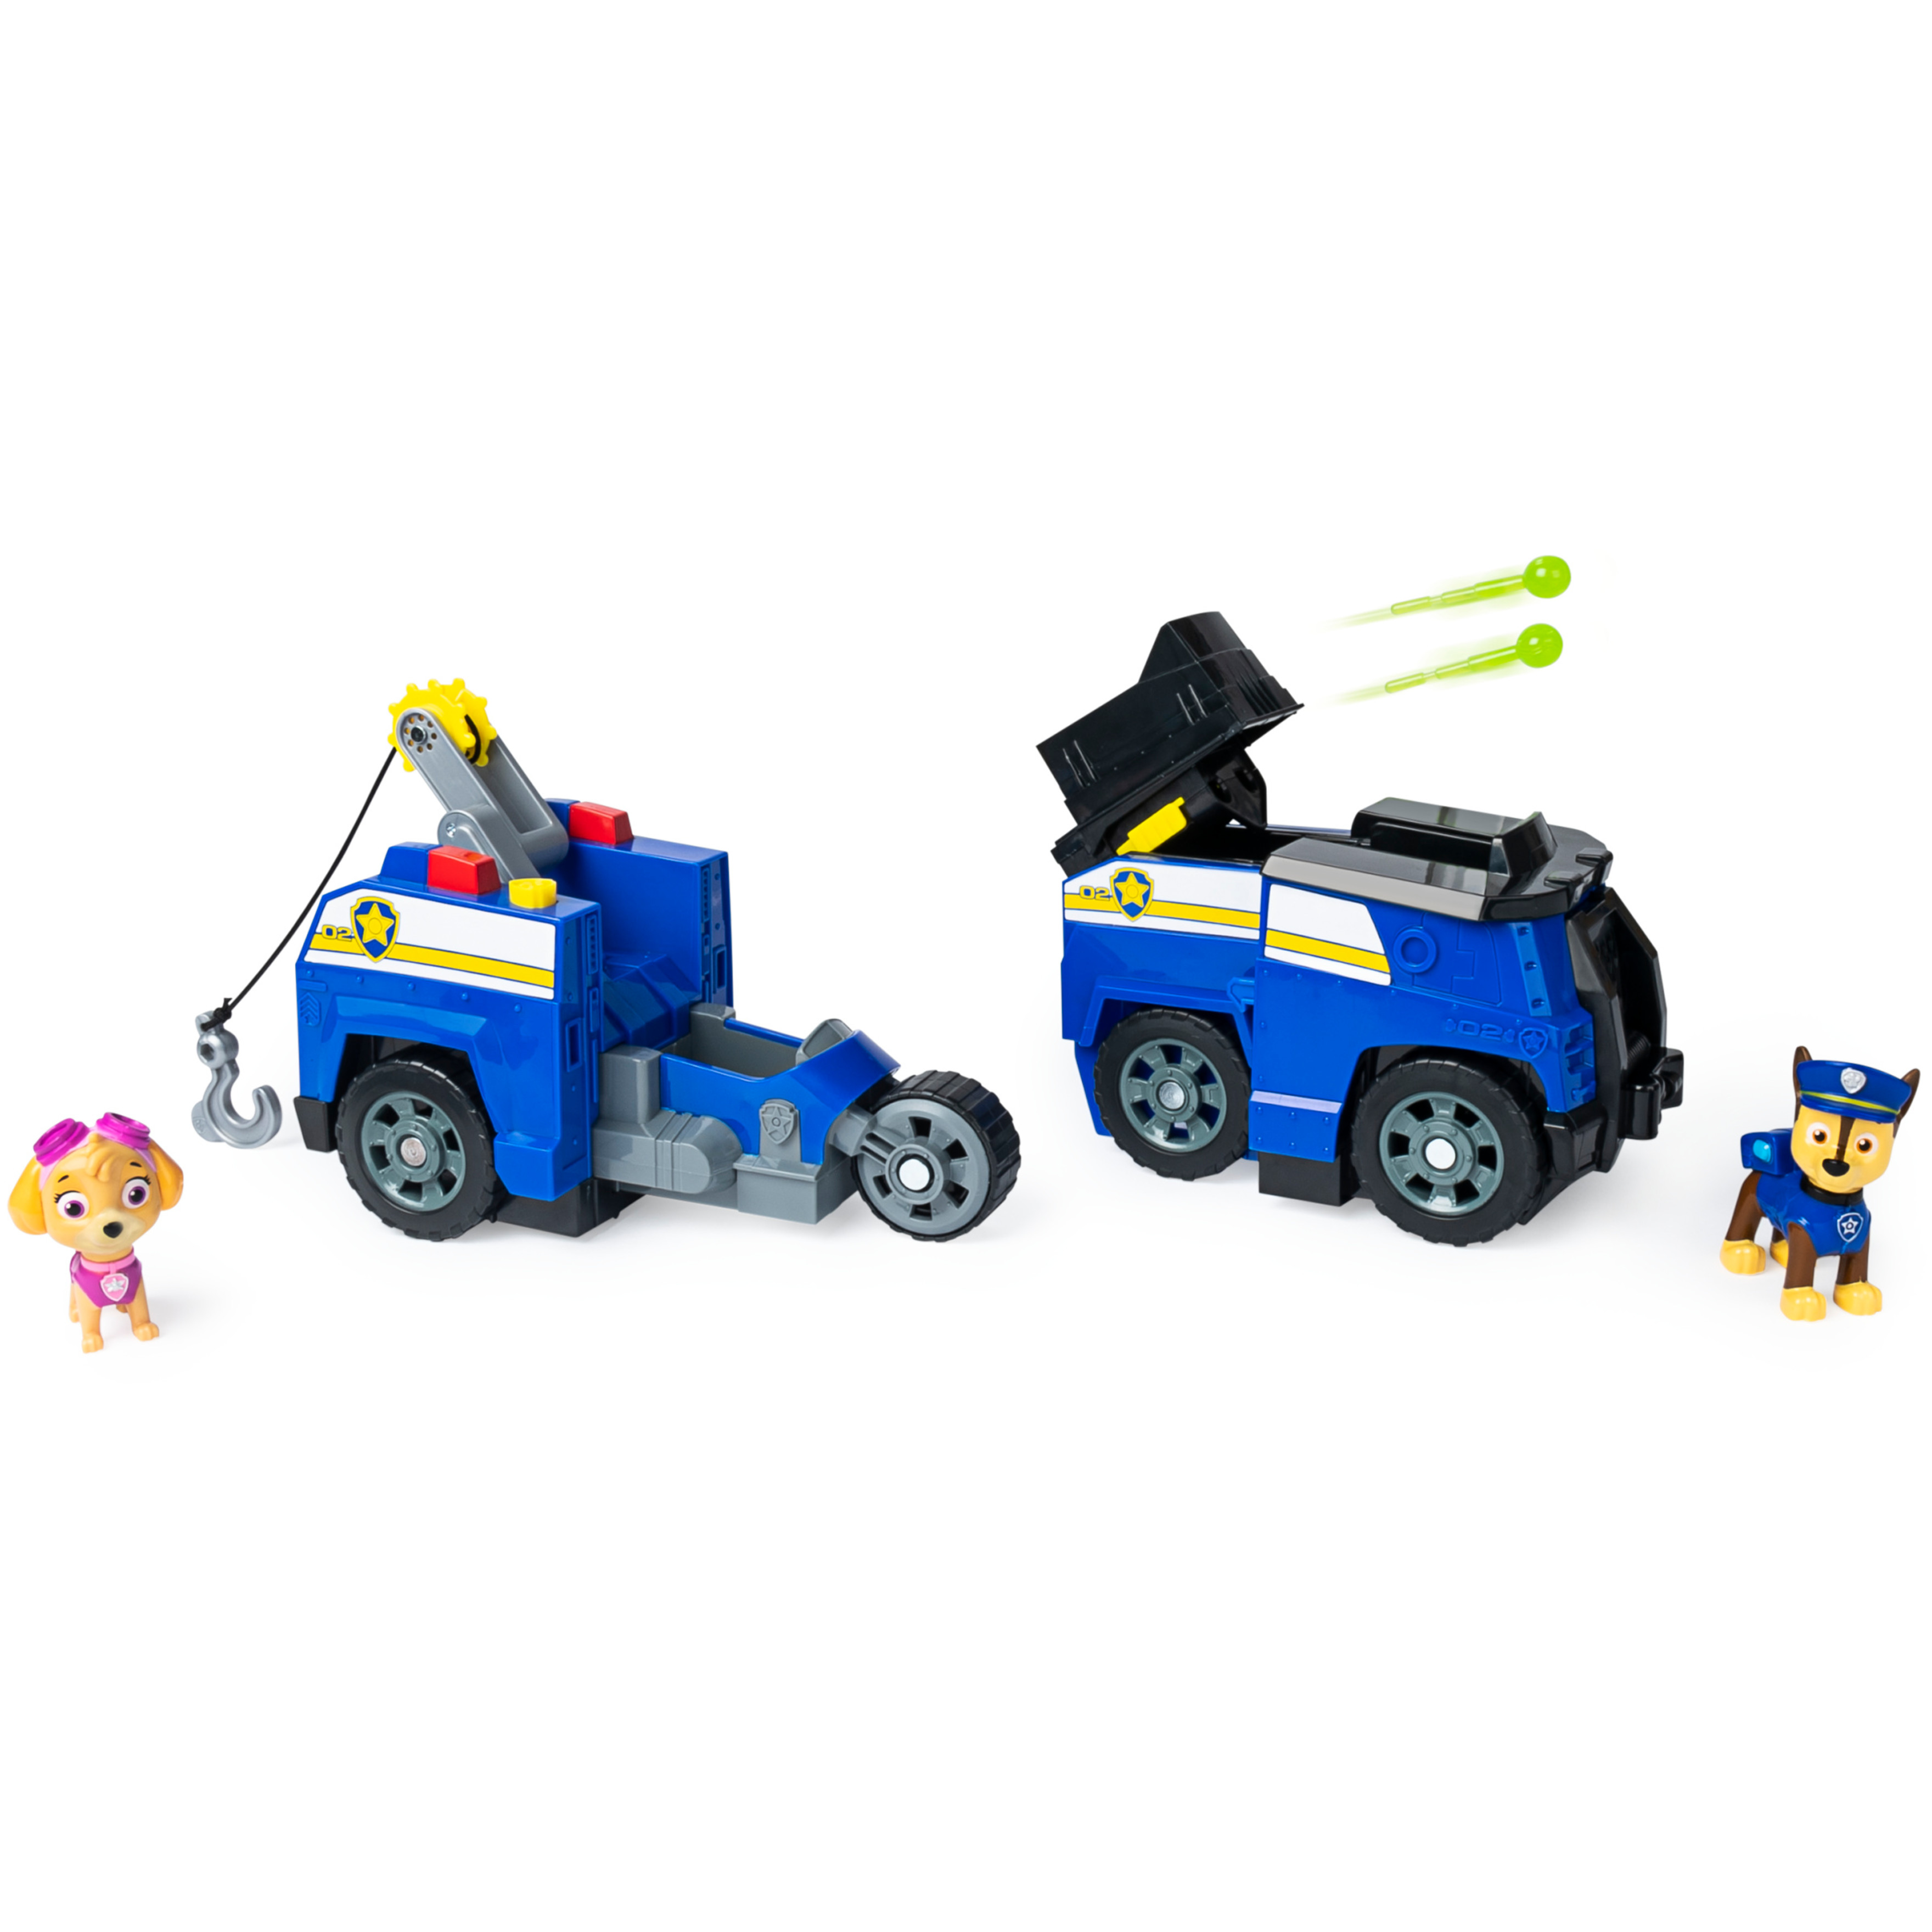 PAW Patrol, Chase Split-Second 2-in-1 Transforming Vehicle with Figure - image 1 of 8